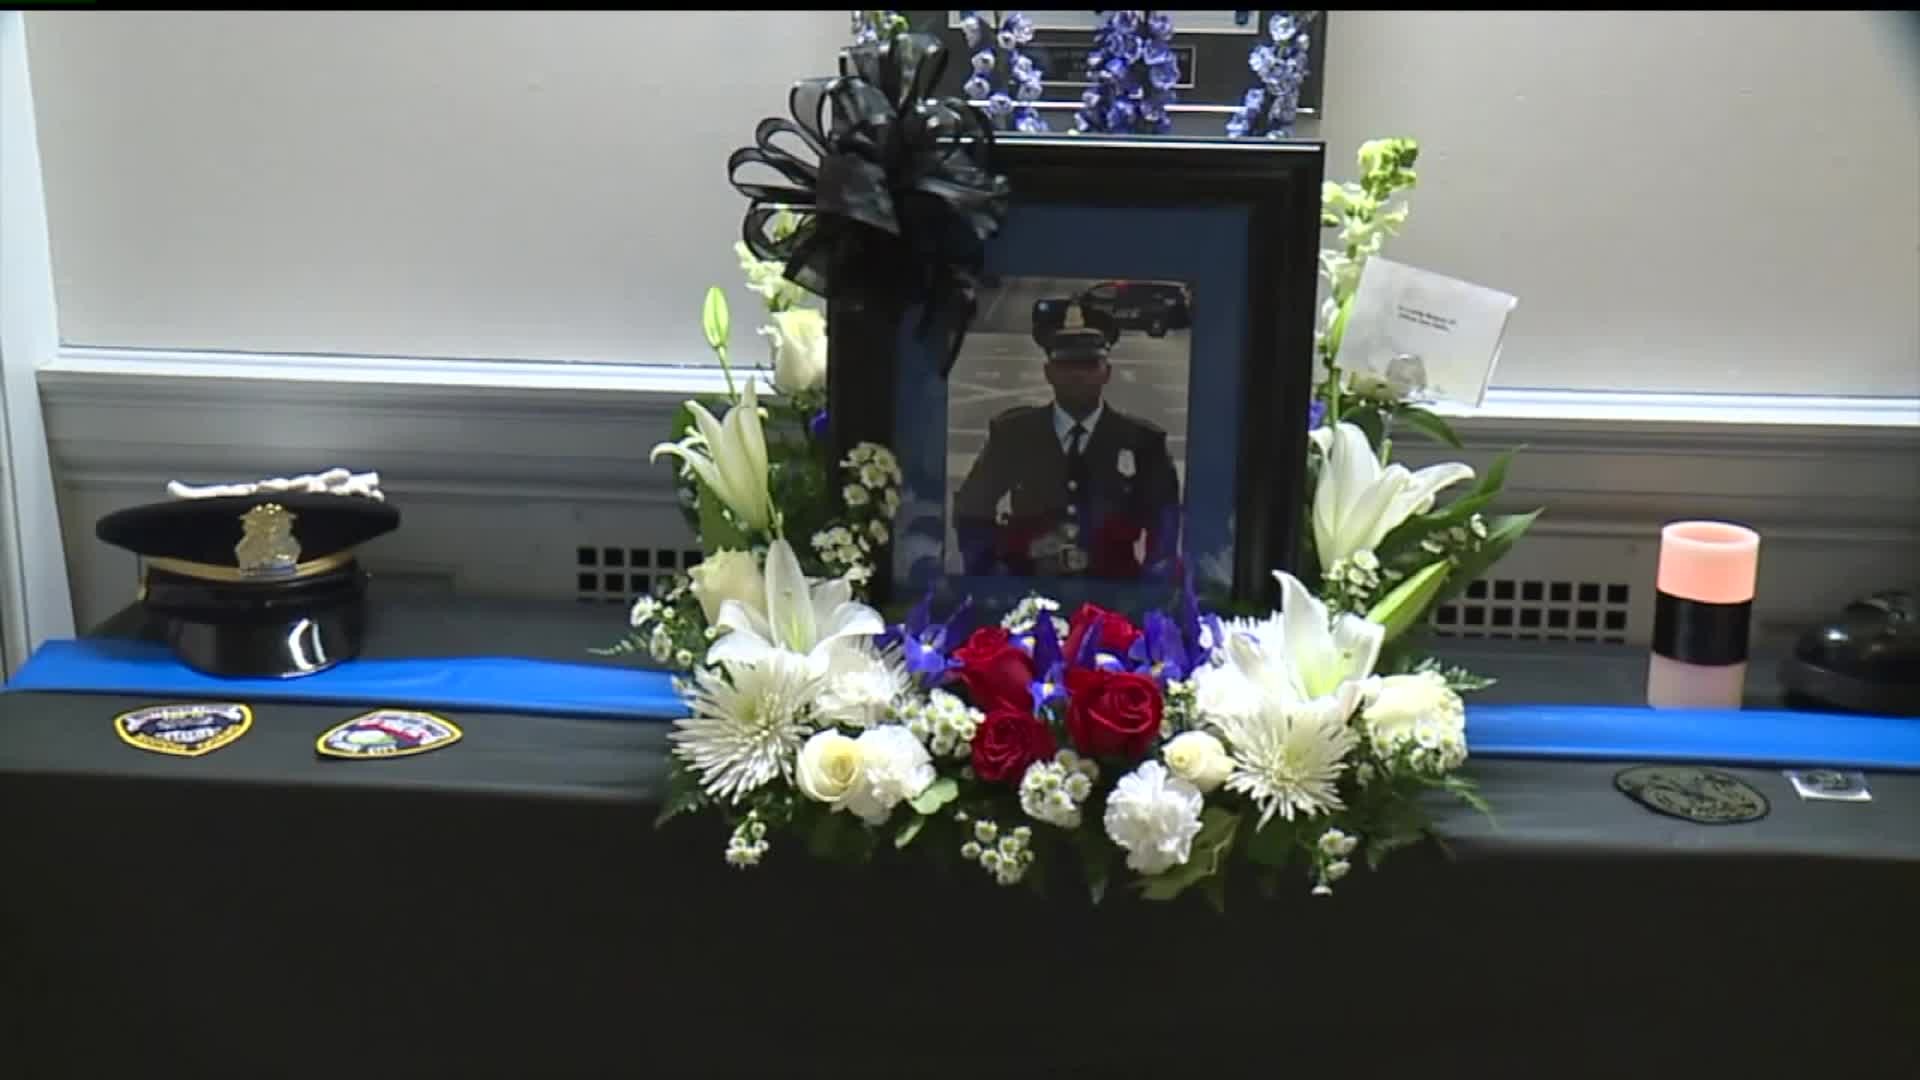 Public welcome to attend memorial for fallen York City Officer